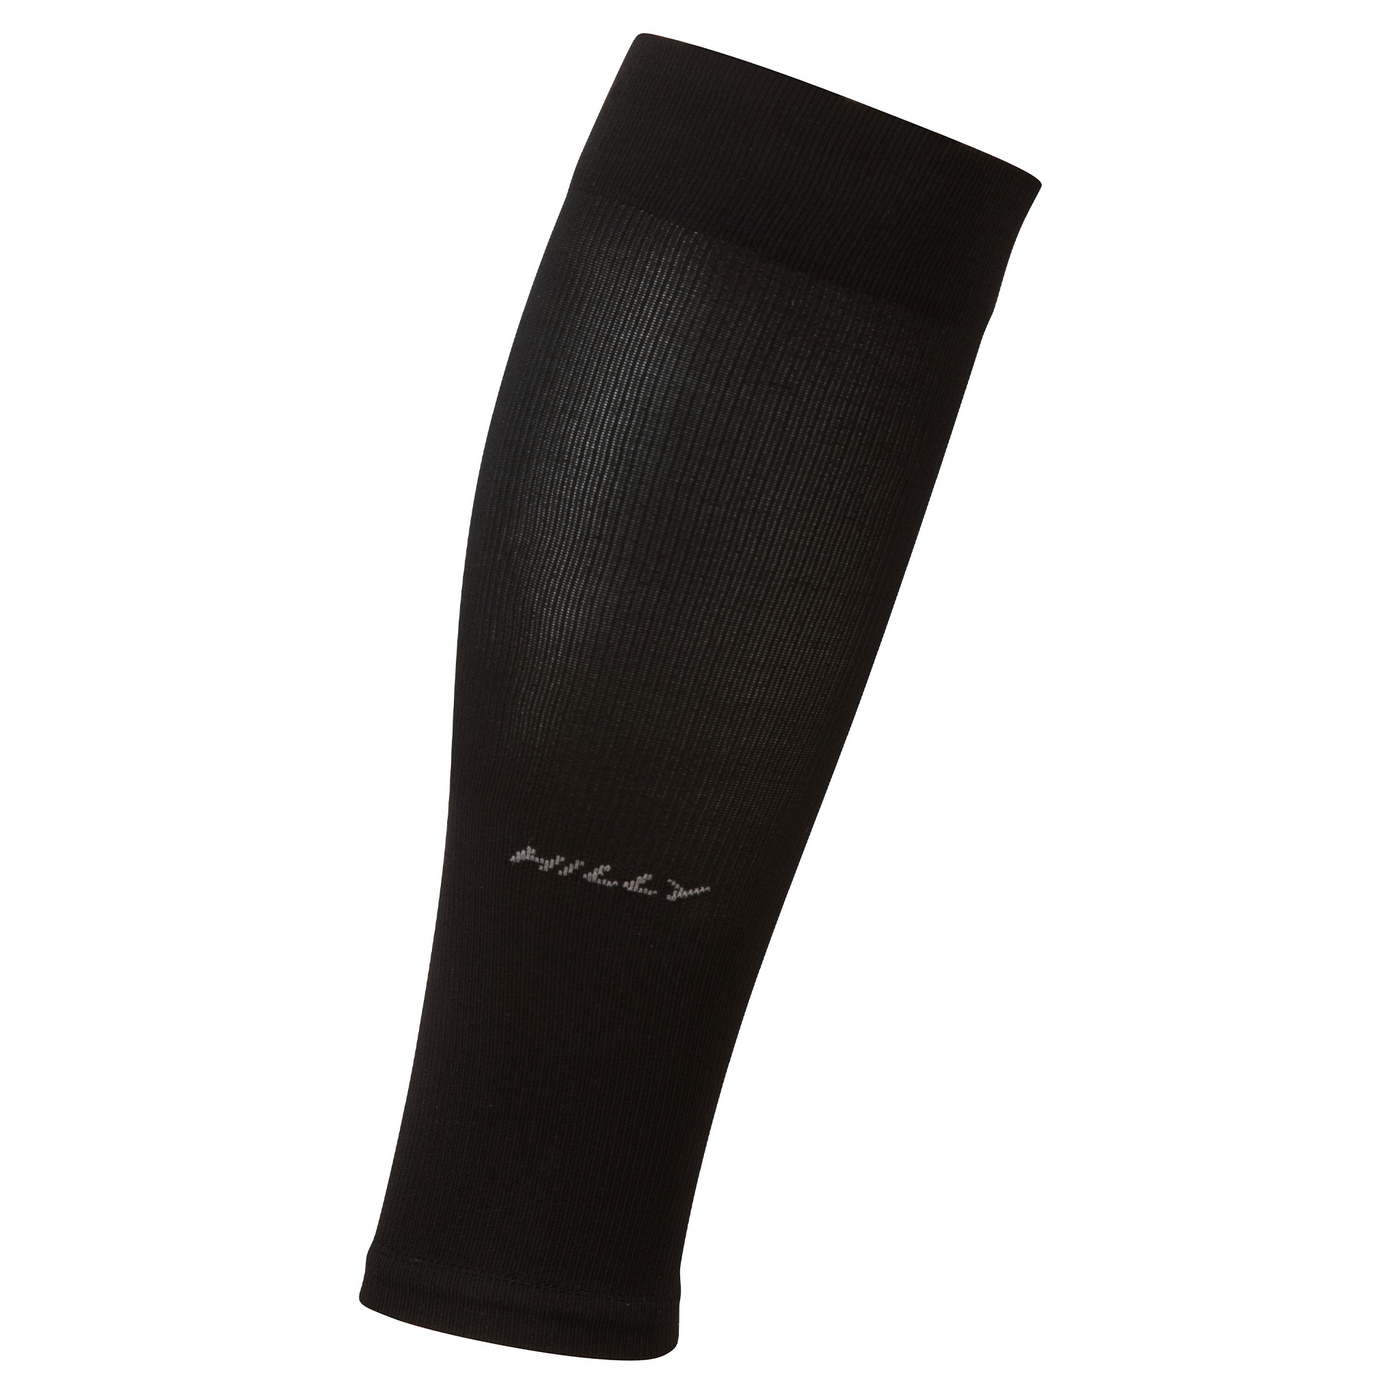 Hilly Pulse Compression Sleeve - Black/Grey